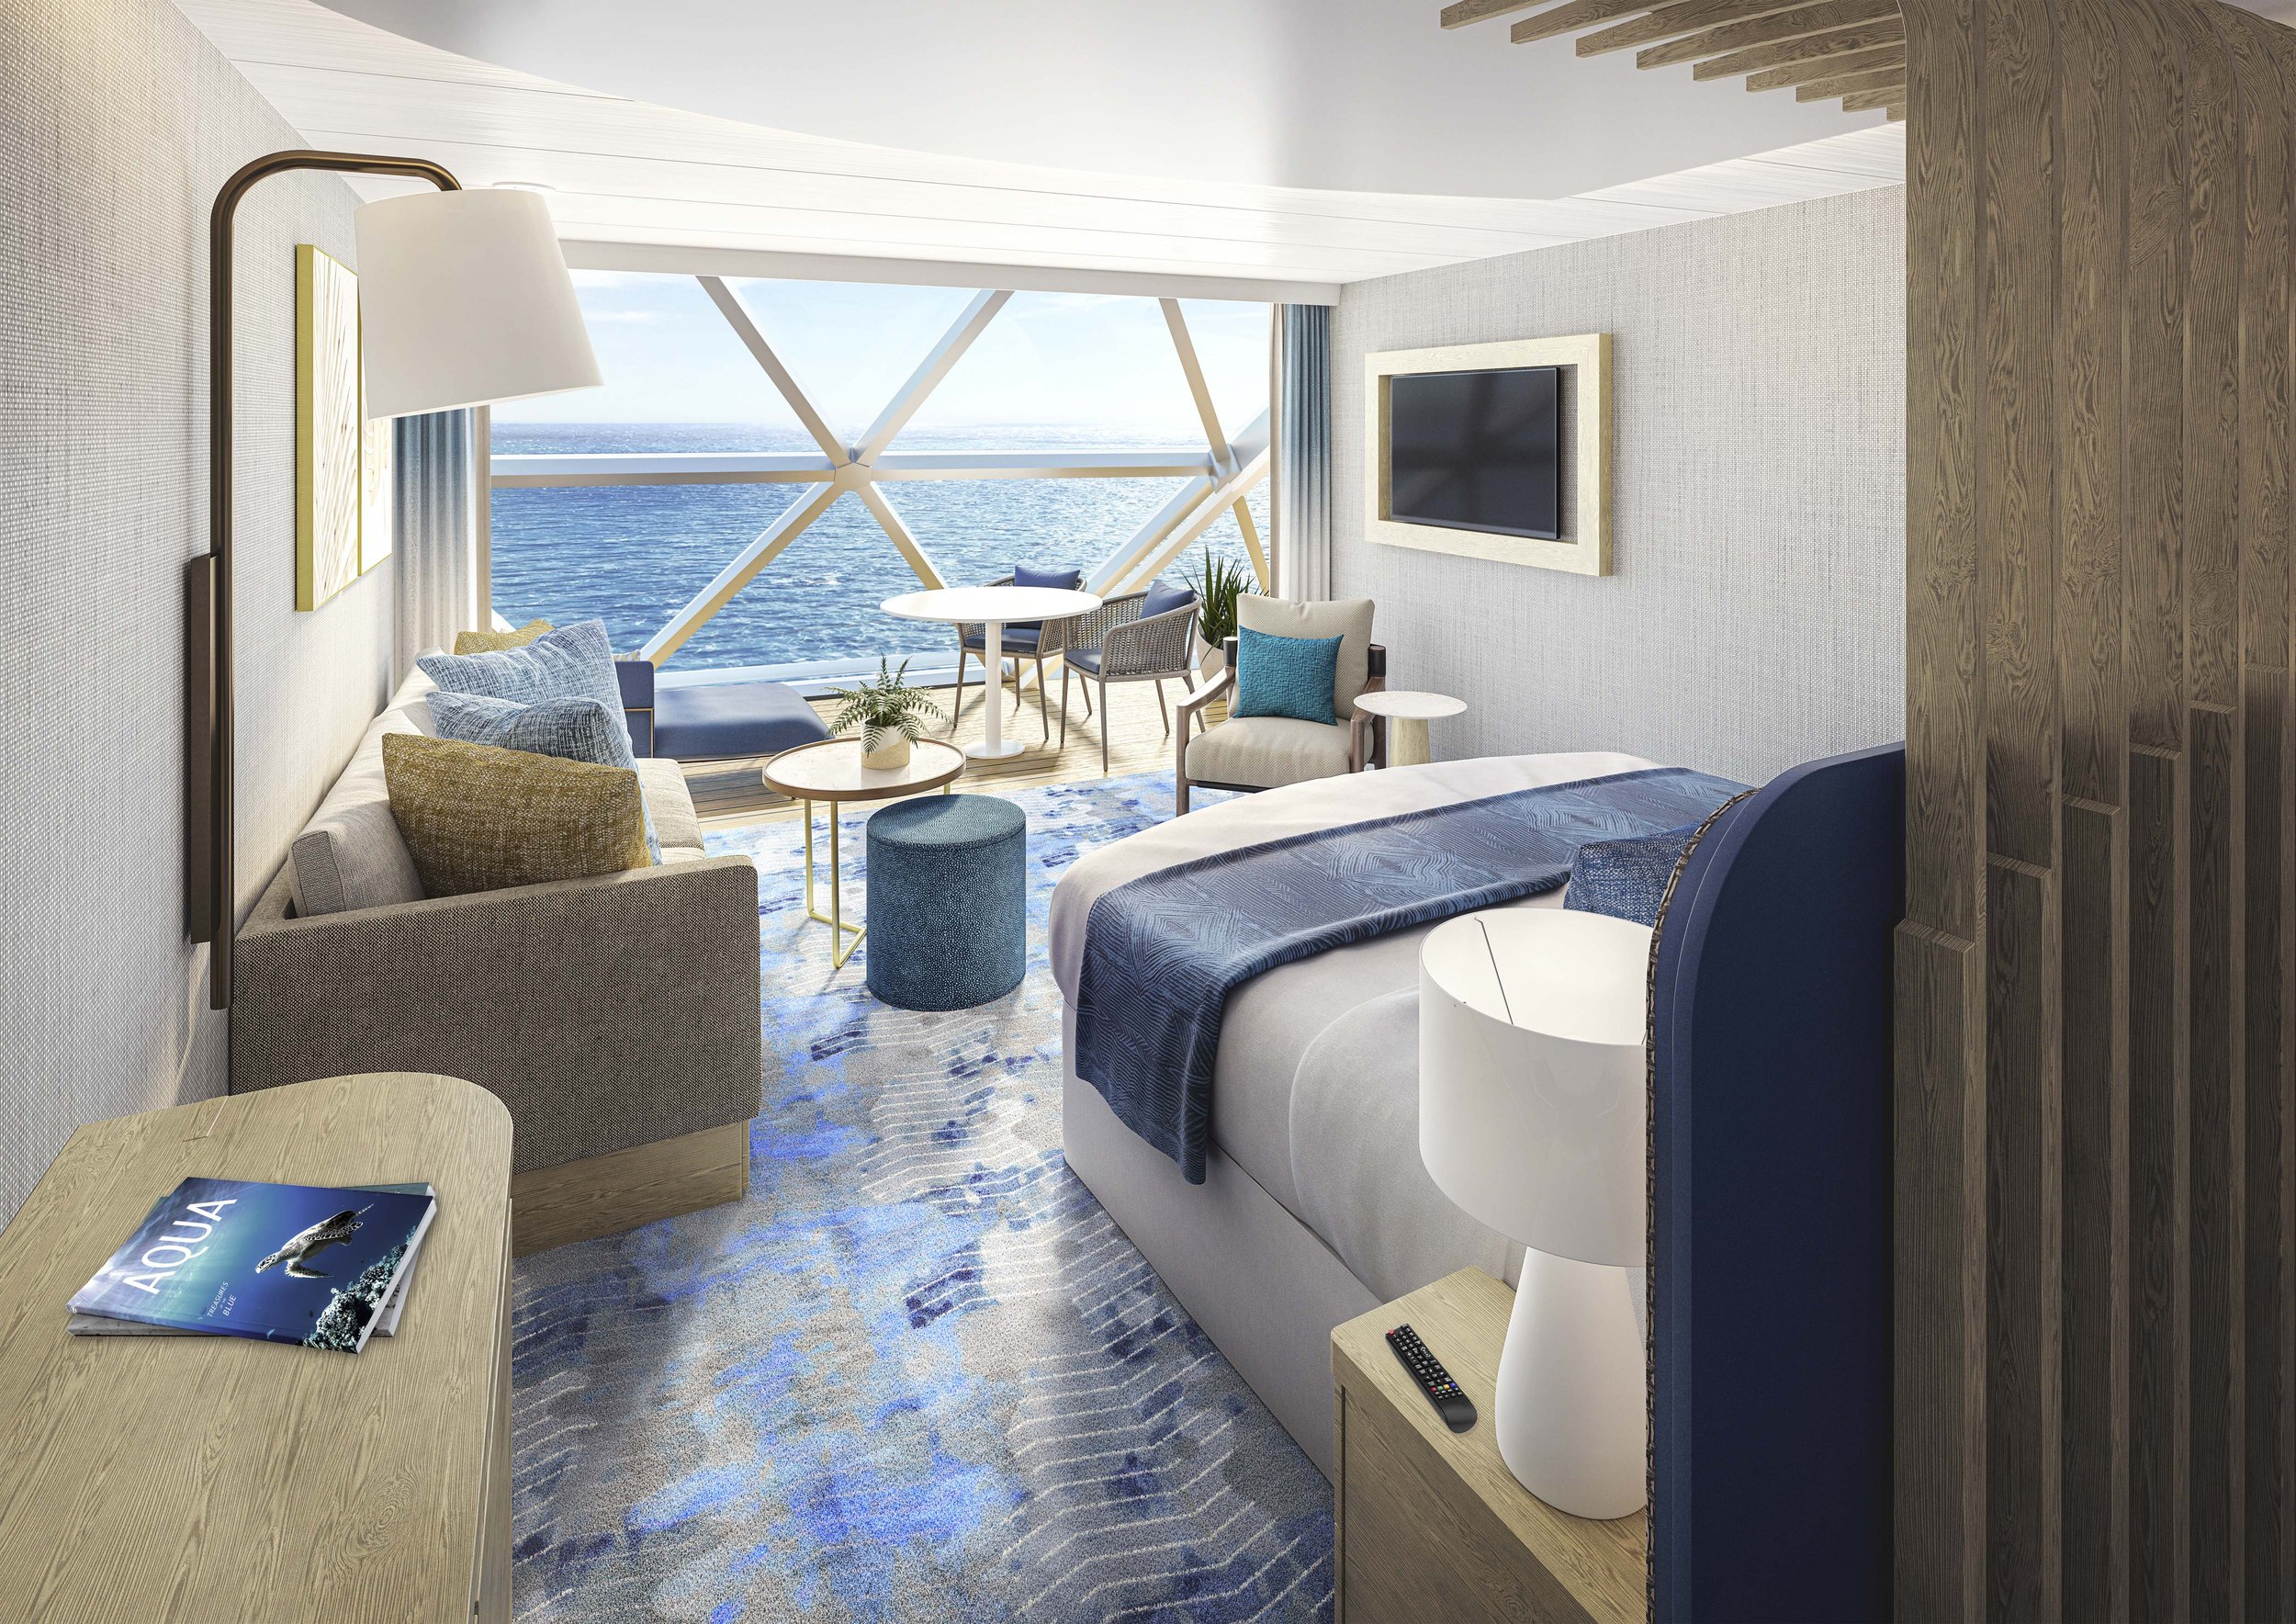 INTRODUCING THE ICON OF VACATIONS: ROYAL CARIBBEAN REVEALS ICON OF THE SEAS